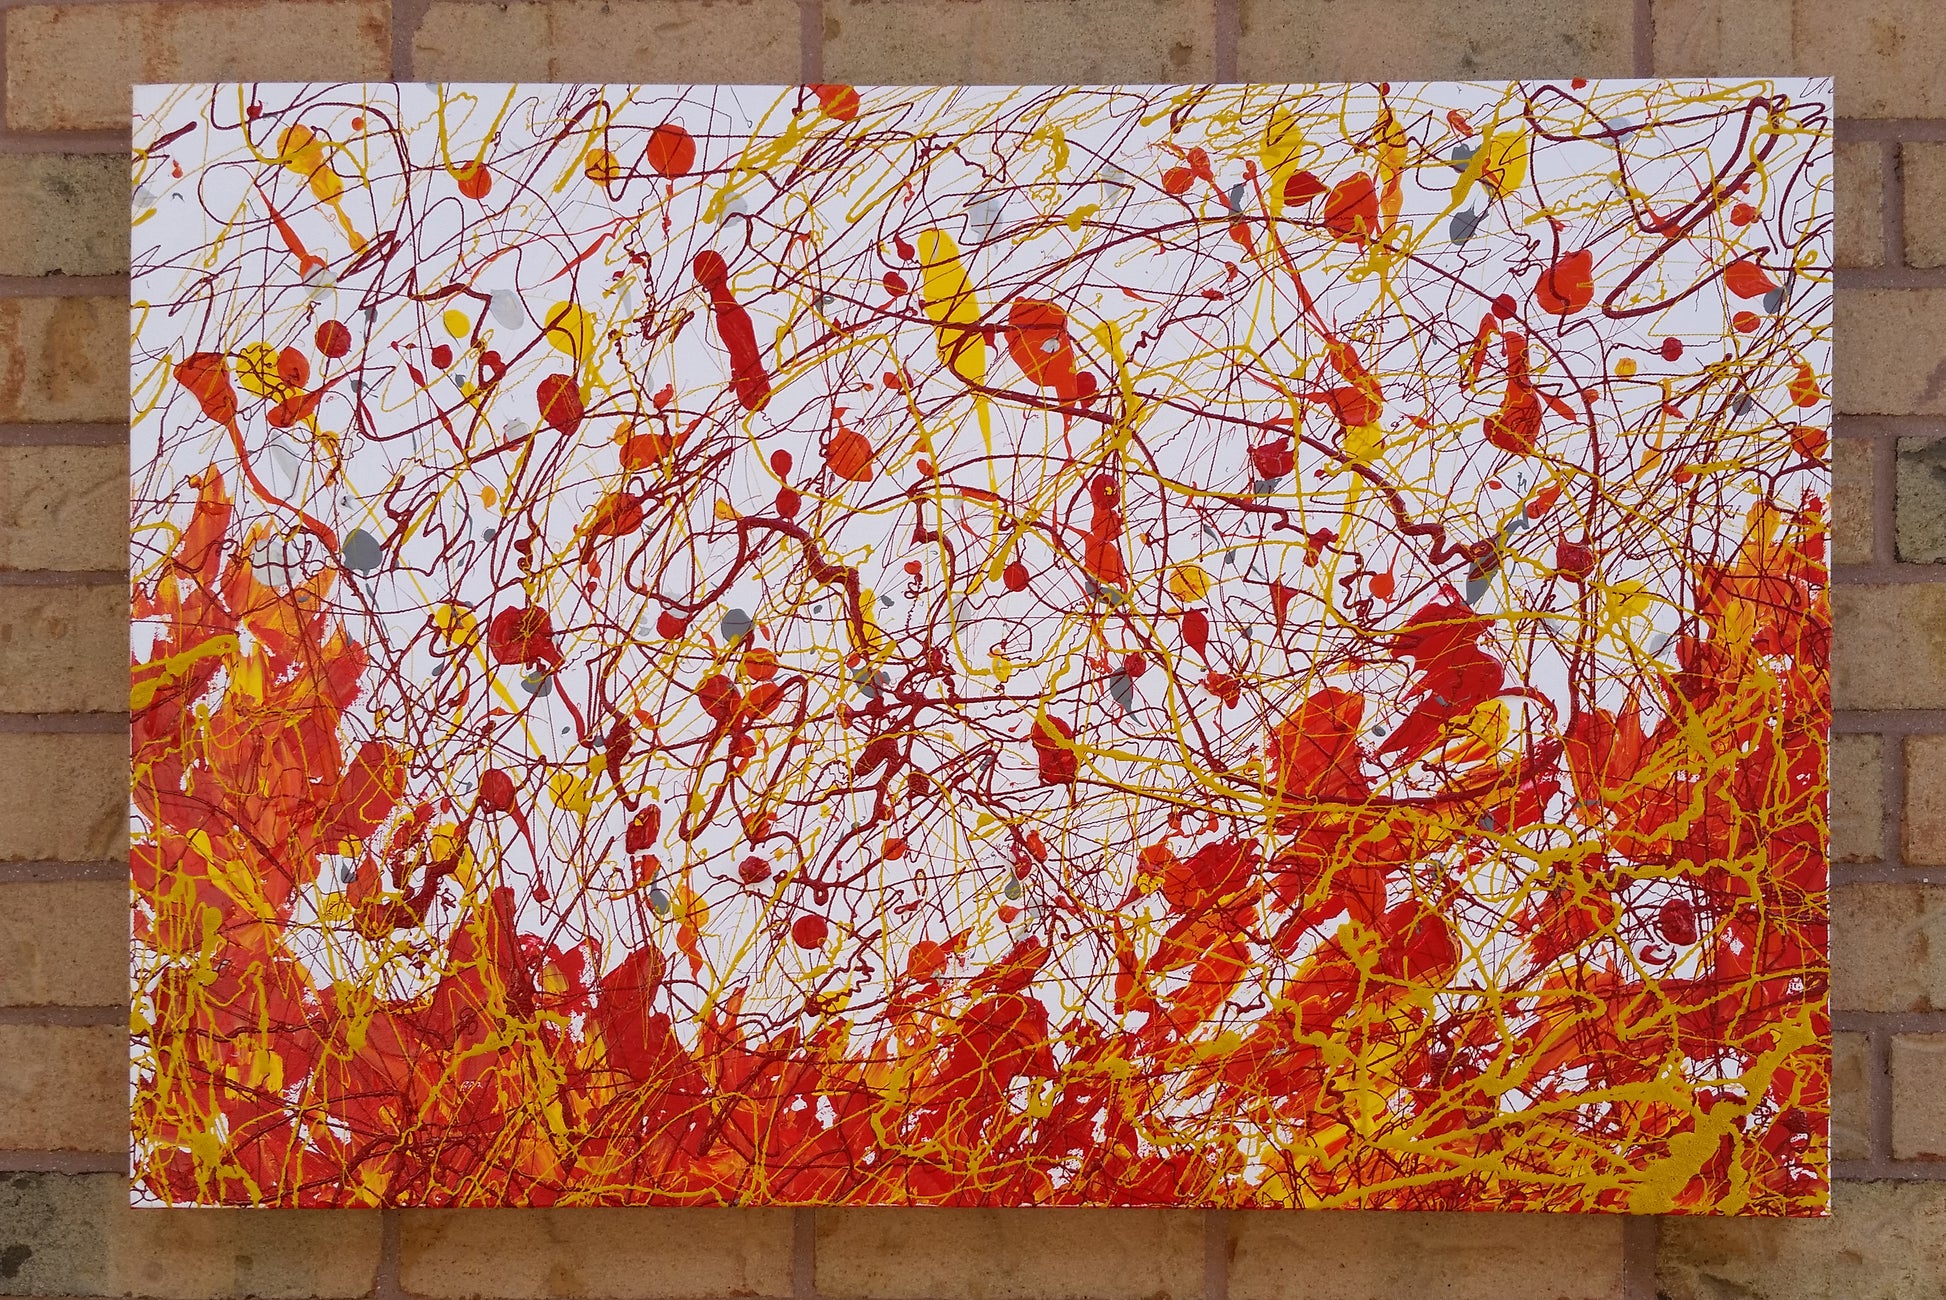 Fire-Dance-Alexandra-Romano-Art-Yellow-Red-Orange-Artworks-for-Sale-Colourful-Vibrant-Abstract-Expressionism-Action-Paintings